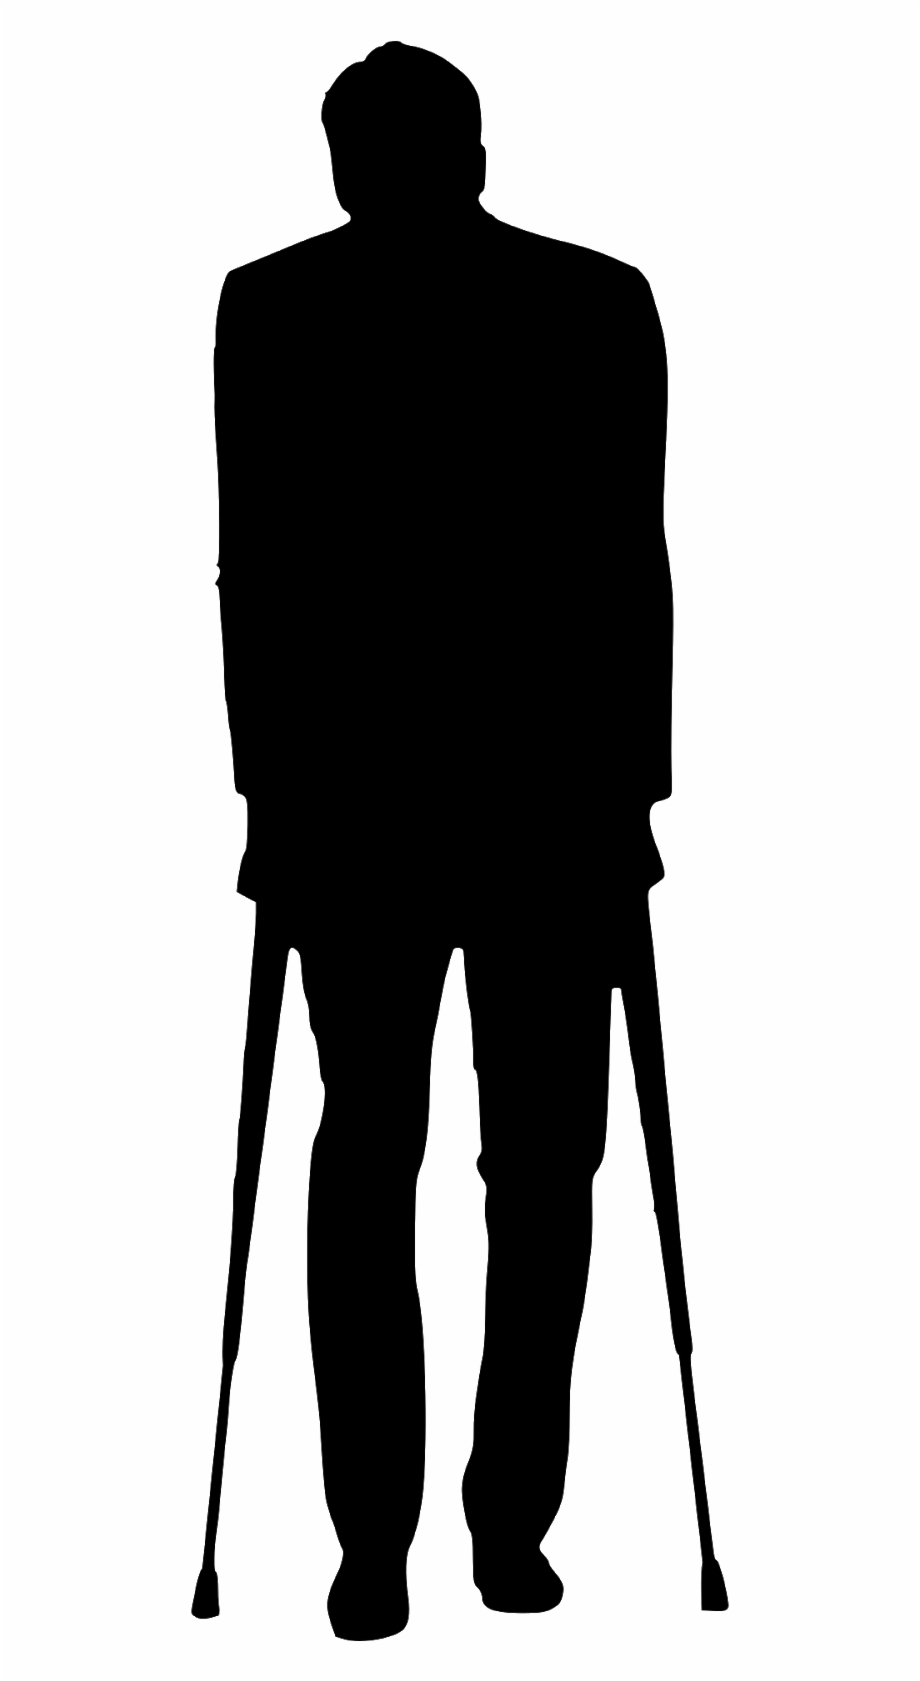 The Free Illustration Of Silhouette Walking Crutches Crutches